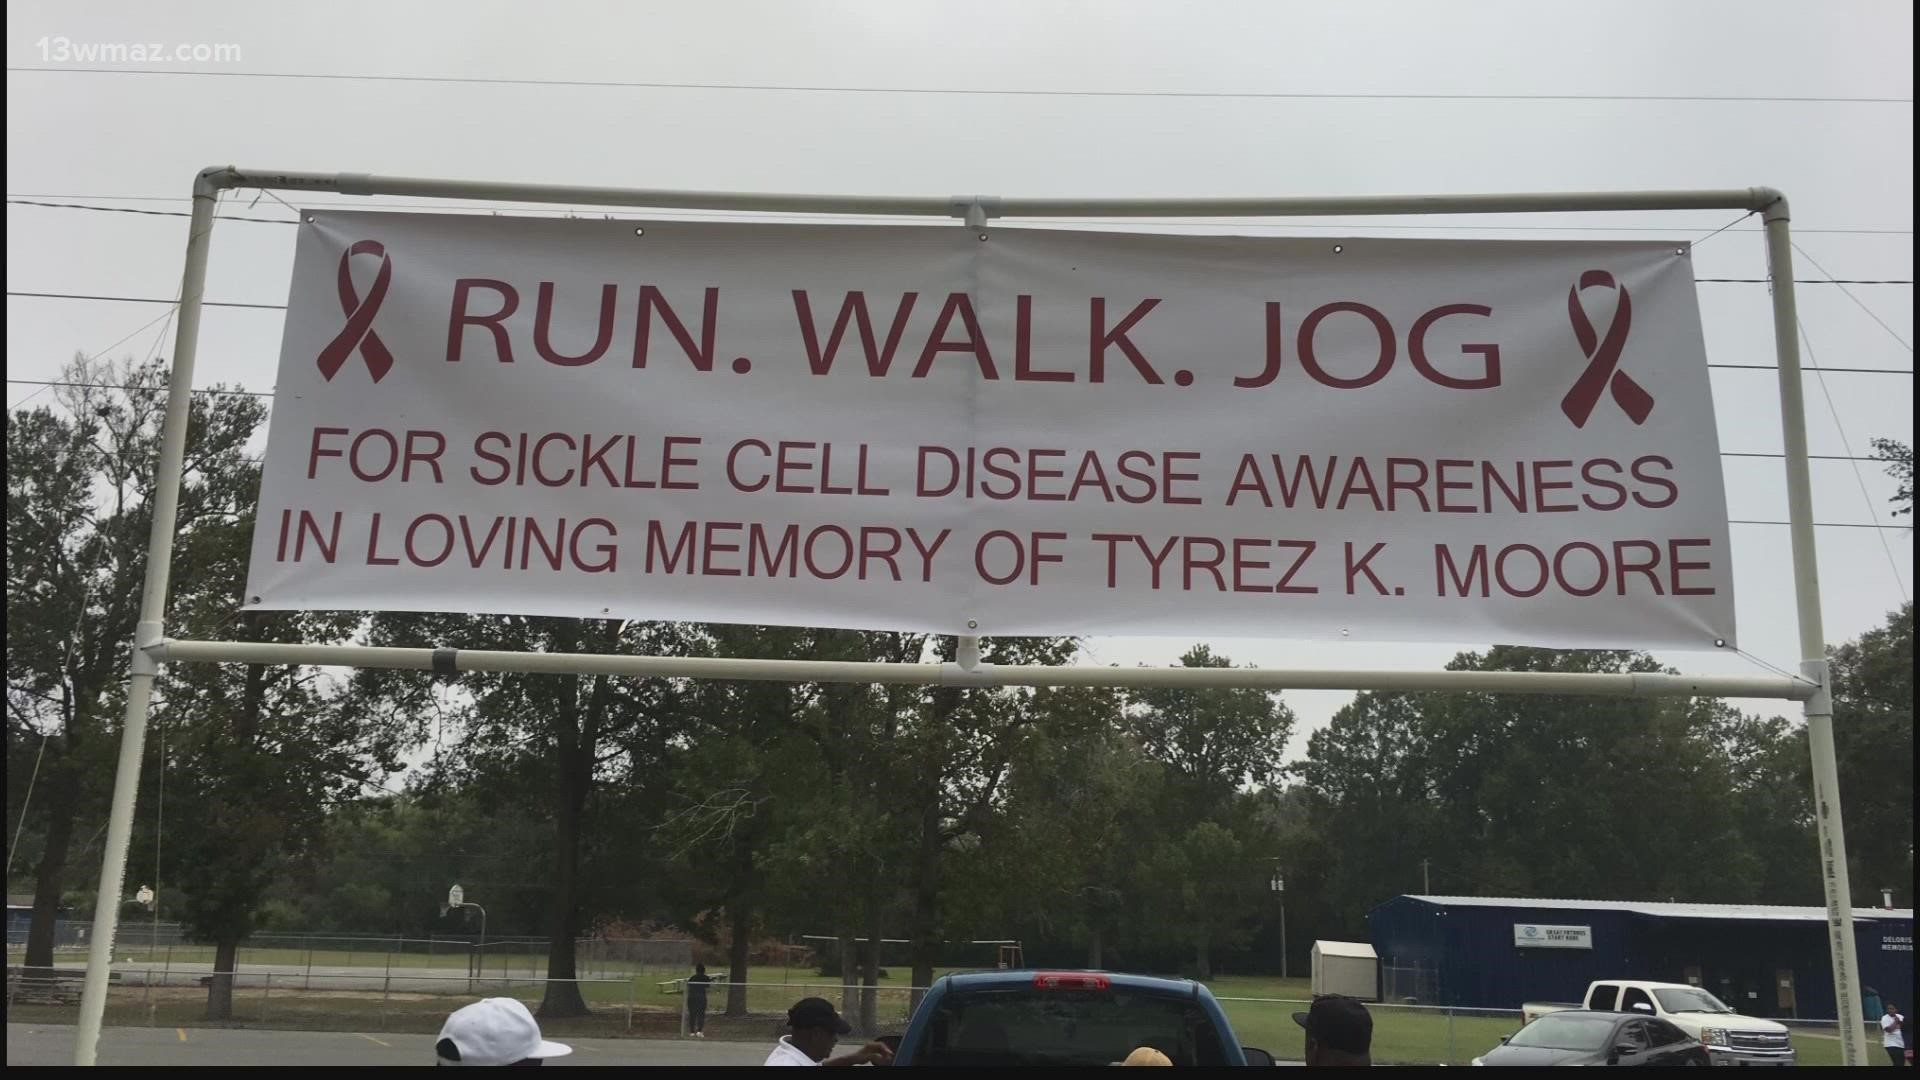 The 5k walk in Tyrez Moore’s honor is this Saturday September 17, and it's happening at Sewell Circle Park at 8 a.m.